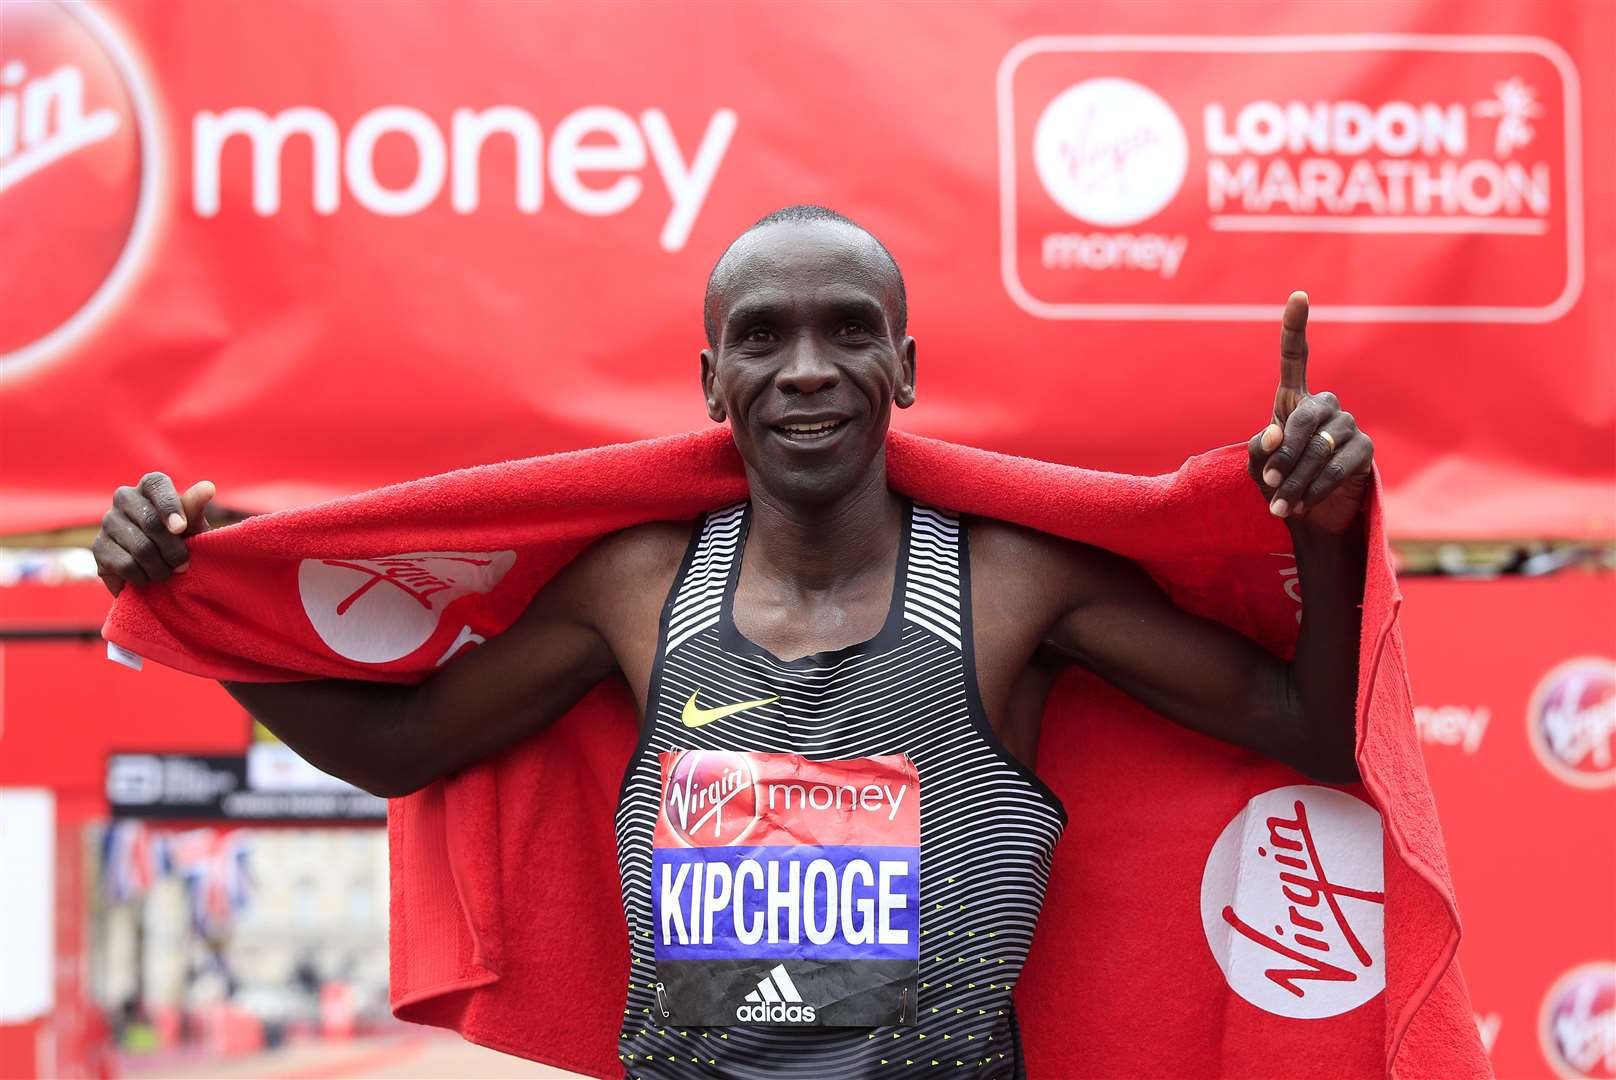 Eliud Kipchoge will be aiming to win the London Marathon for a fifth time when he competes in the elite men’s race (Jonathan Brady/PA)